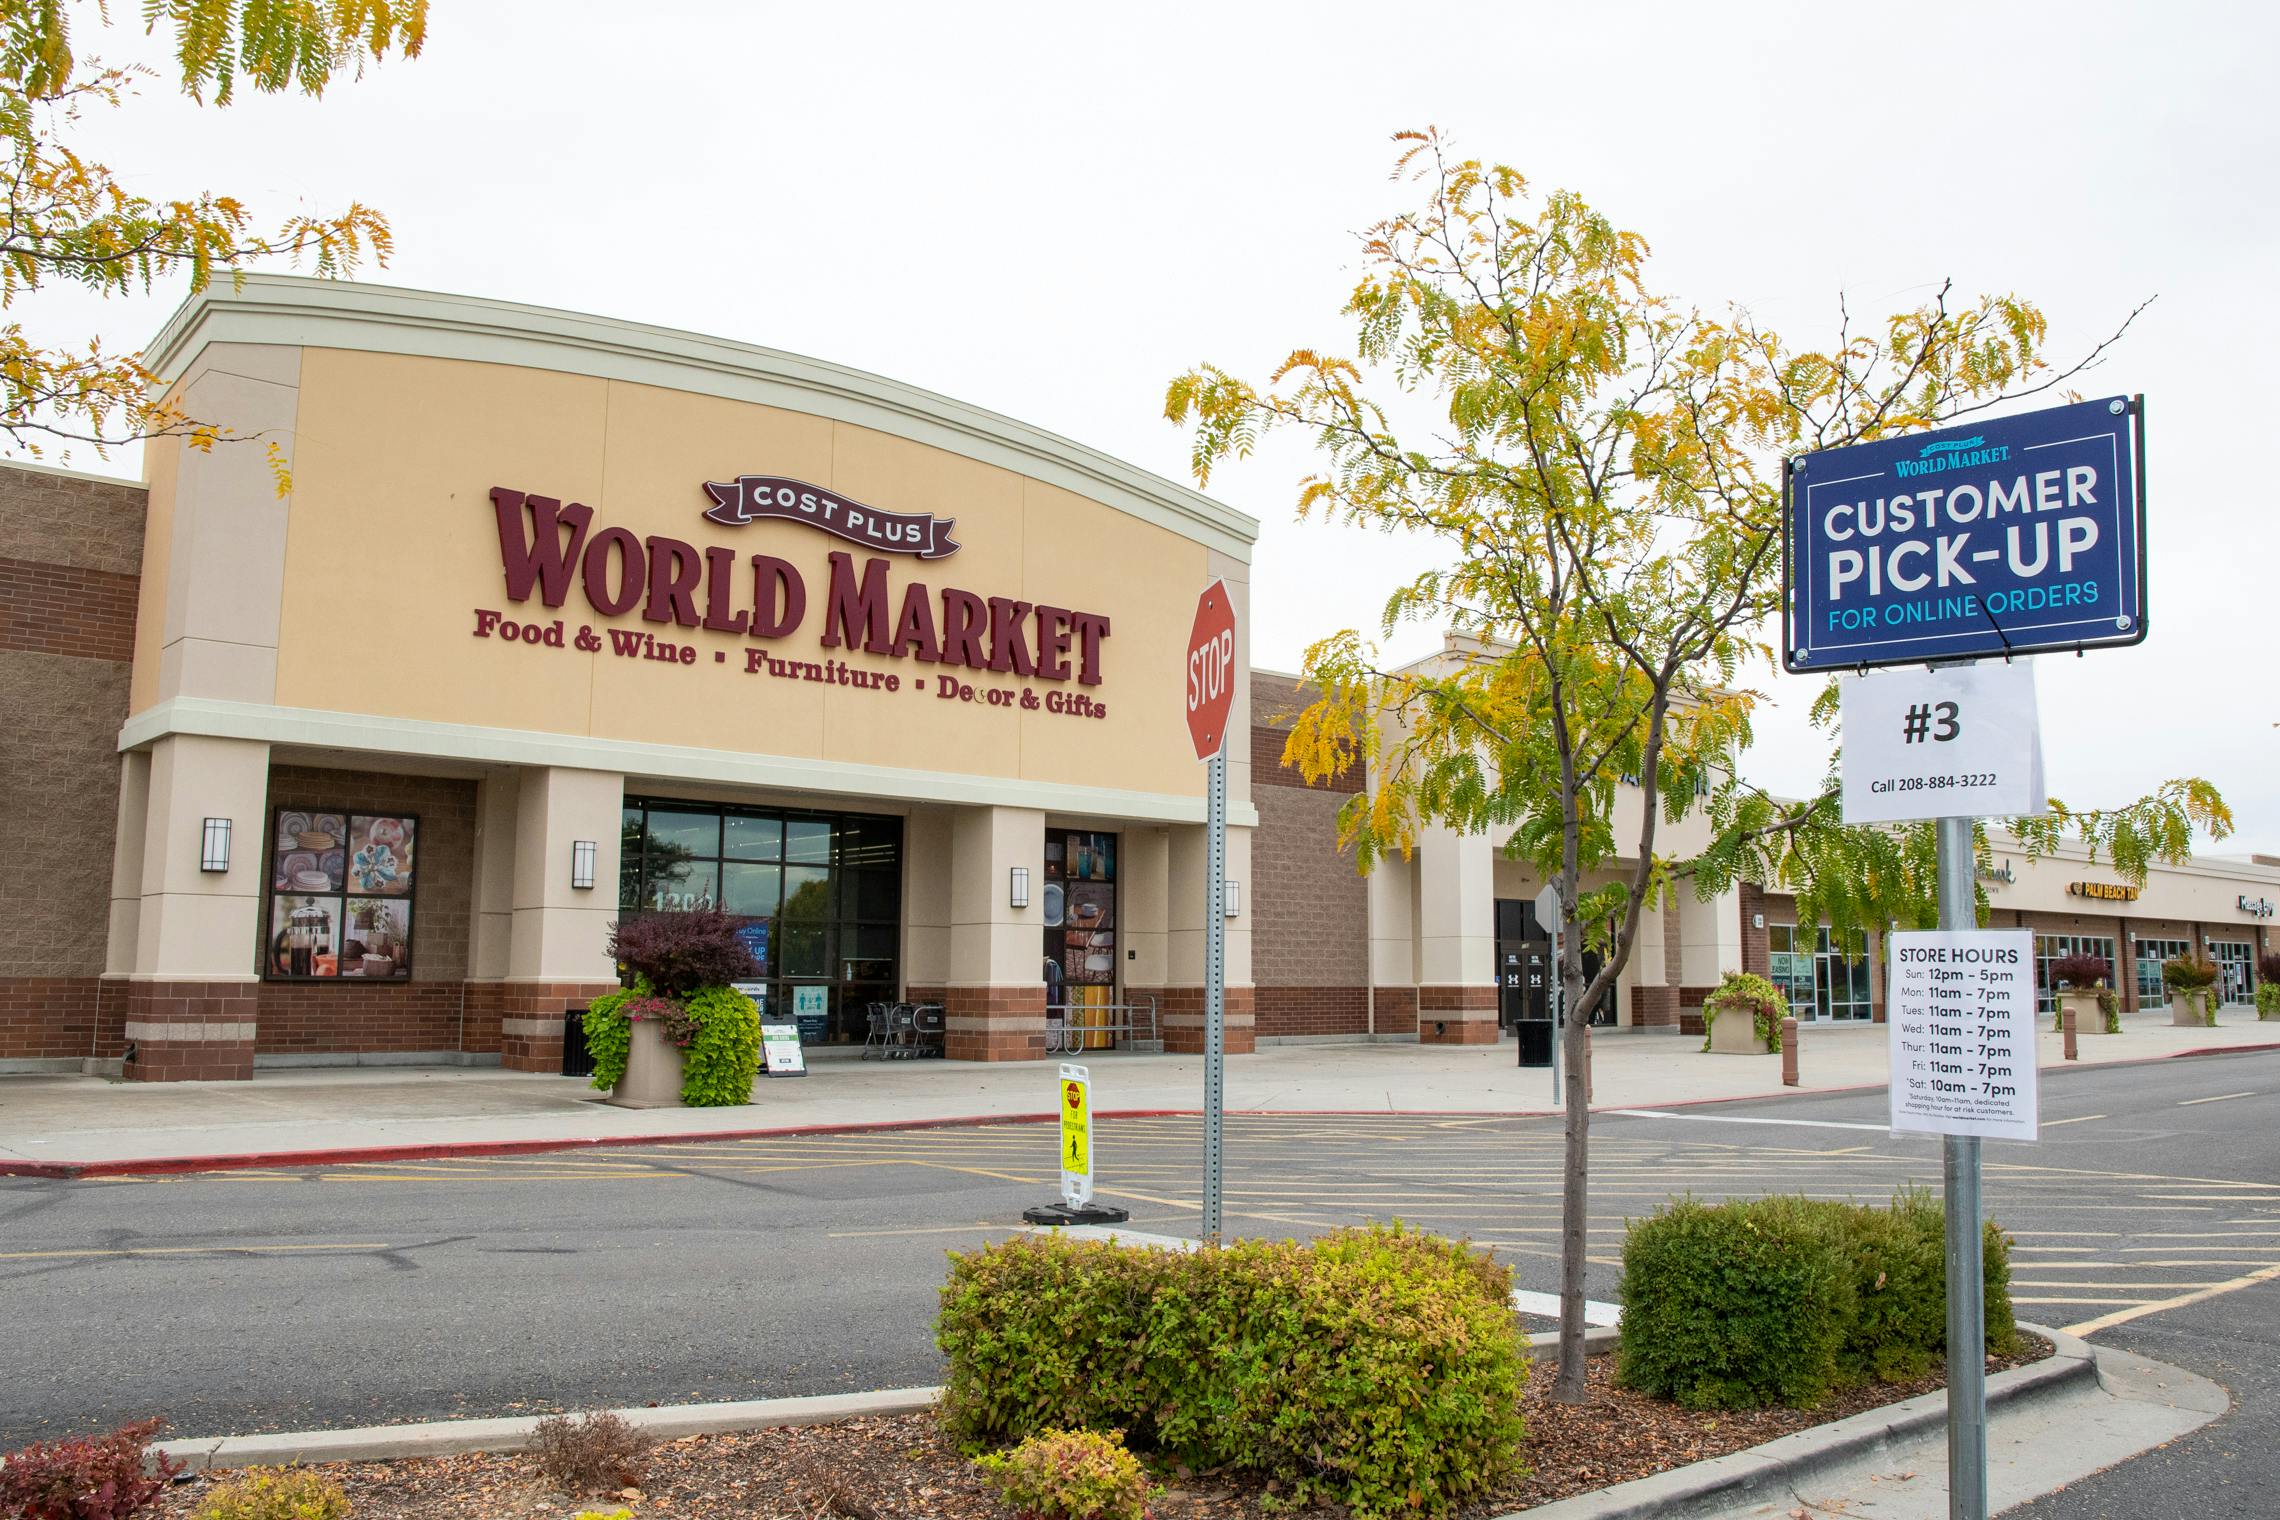 World Market Cost Plus Store Front Curbside Pickup 2020 10 1602782957 1602782957 ?auto=compress,format&fit=max